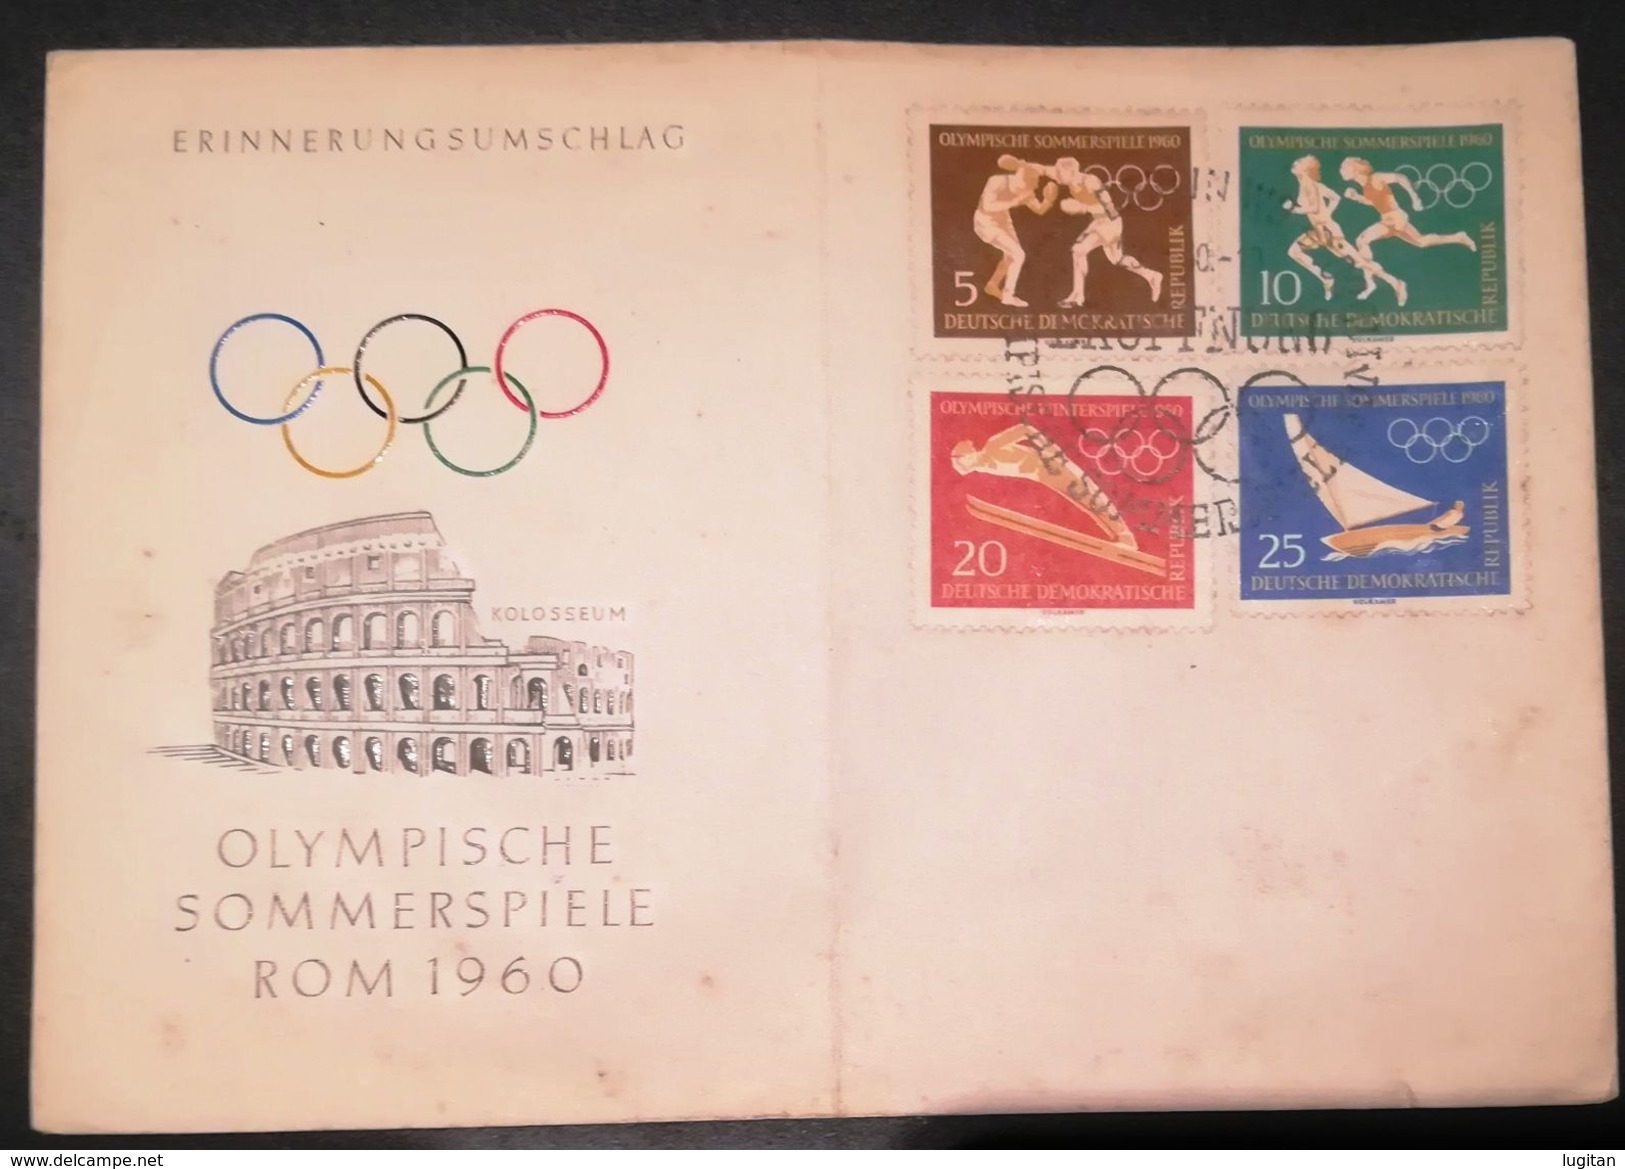 FILATELIA - TEMATICA SPORT - GERMANIA  DDR - GERMANY - OLIMPIADI INVERNALI SQUAW VALLEY - 1960 FDC - OLYMPIC GAMES - Inverno1960: Squaw Valley